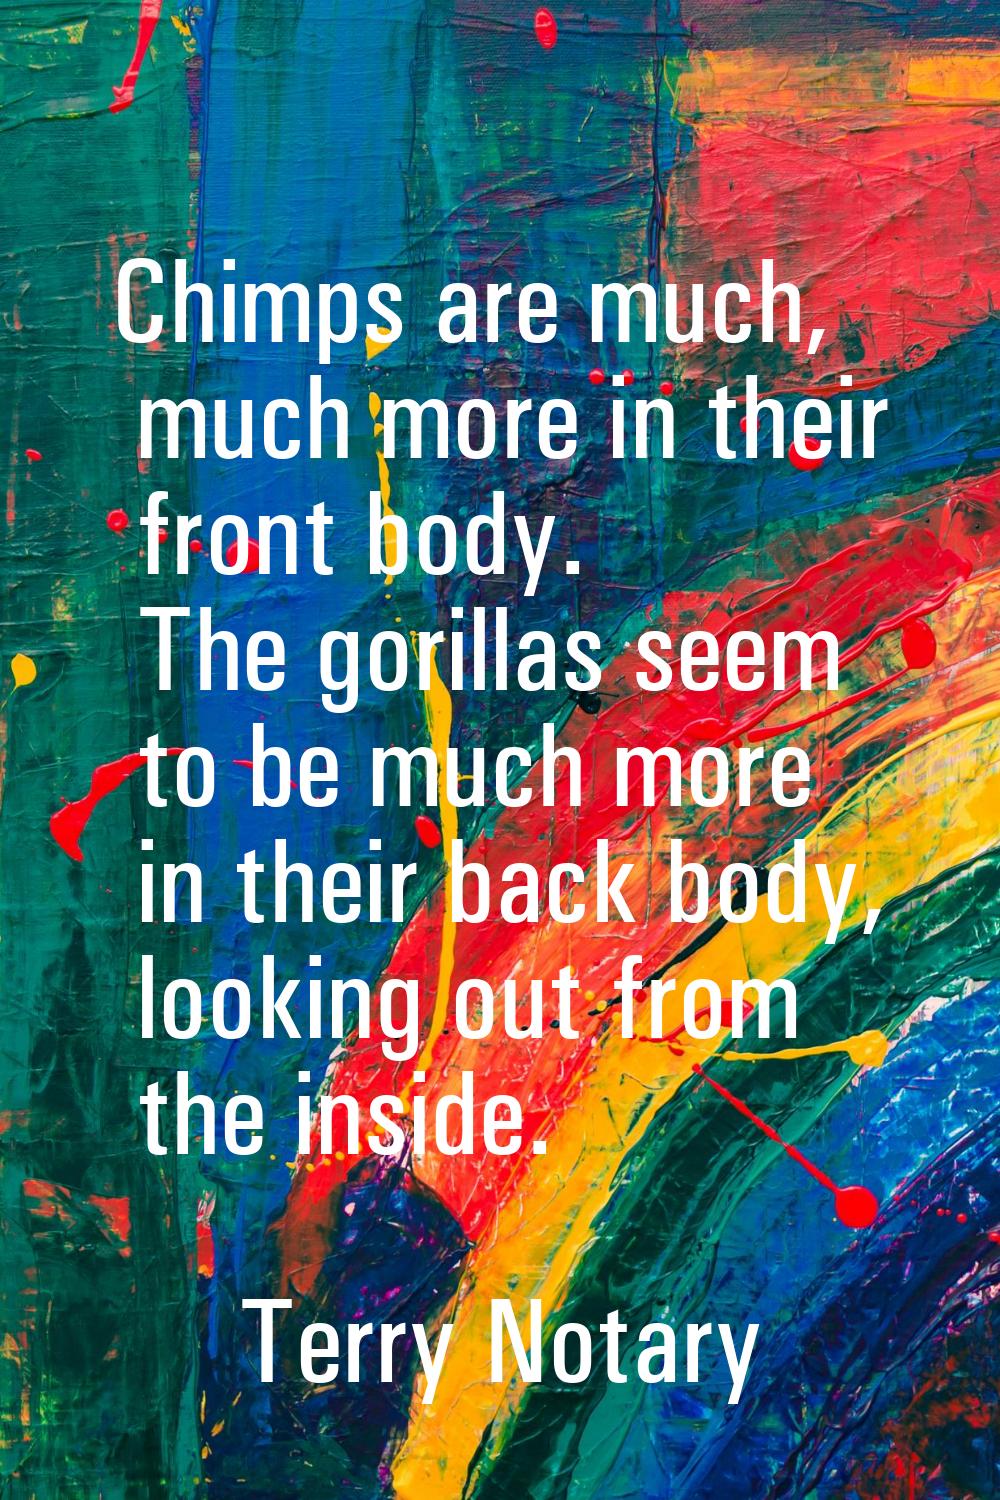 Chimps are much, much more in their front body. The gorillas seem to be much more in their back bod